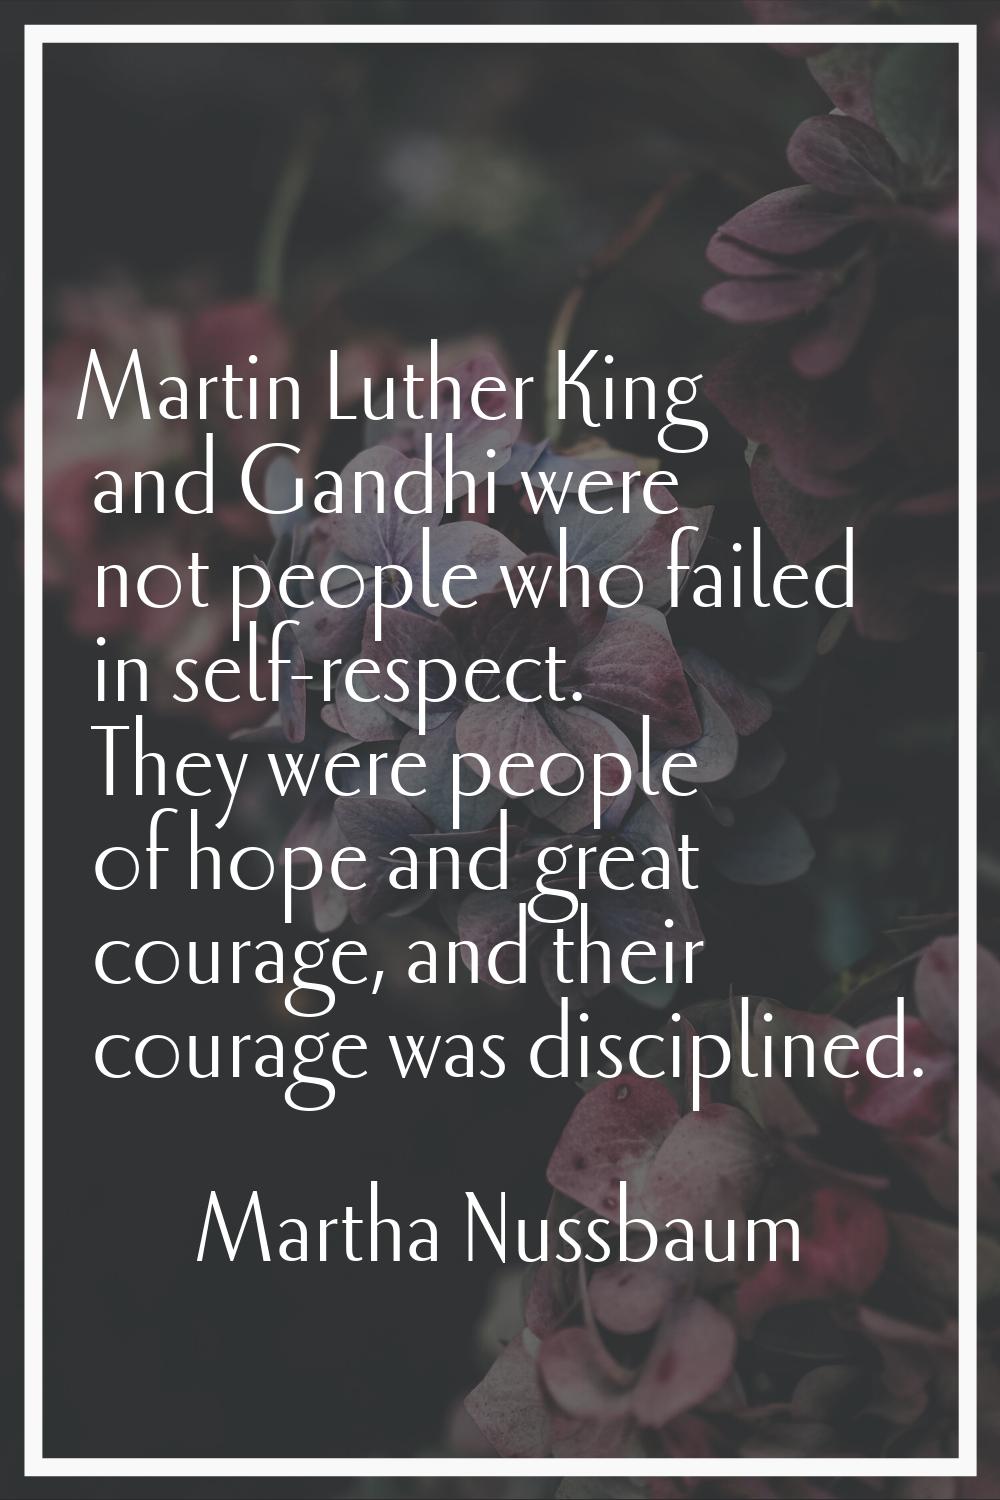 Martin Luther King and Gandhi were not people who failed in self-respect. They were people of hope 